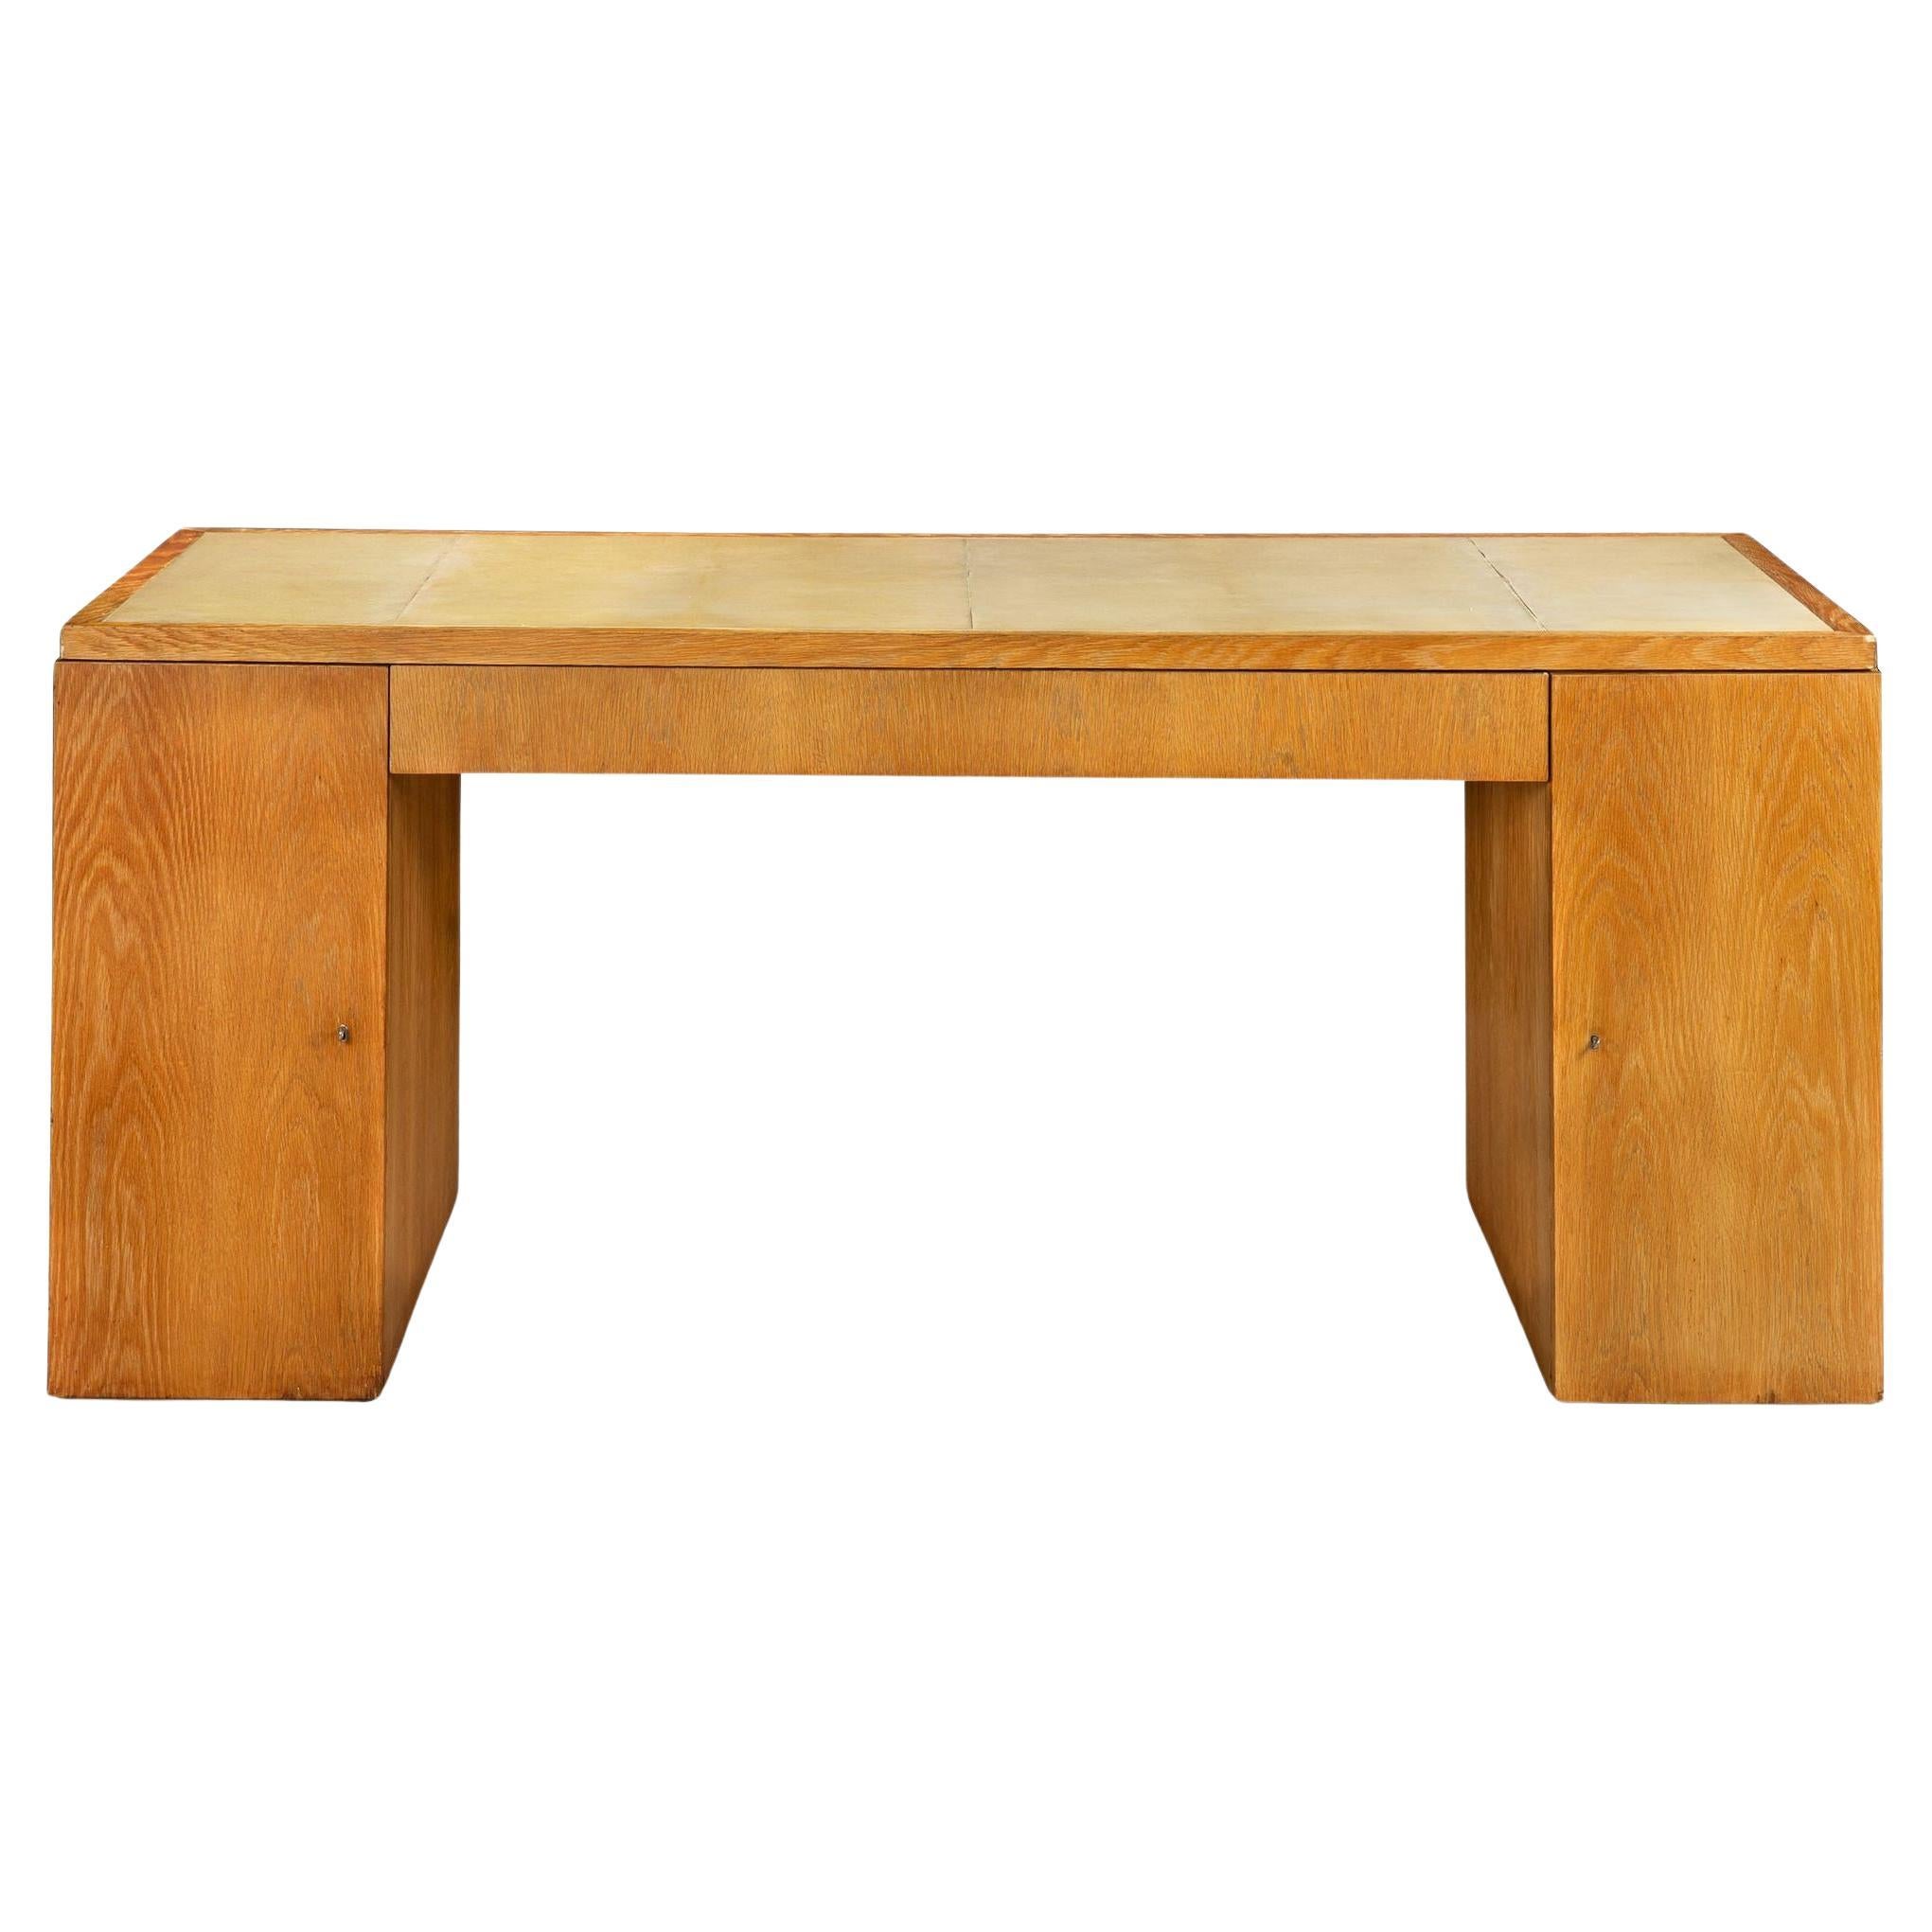 French Modernist Cerused Oak and Lacquered Skin Pedestal Desk ca. 1950s For Sale